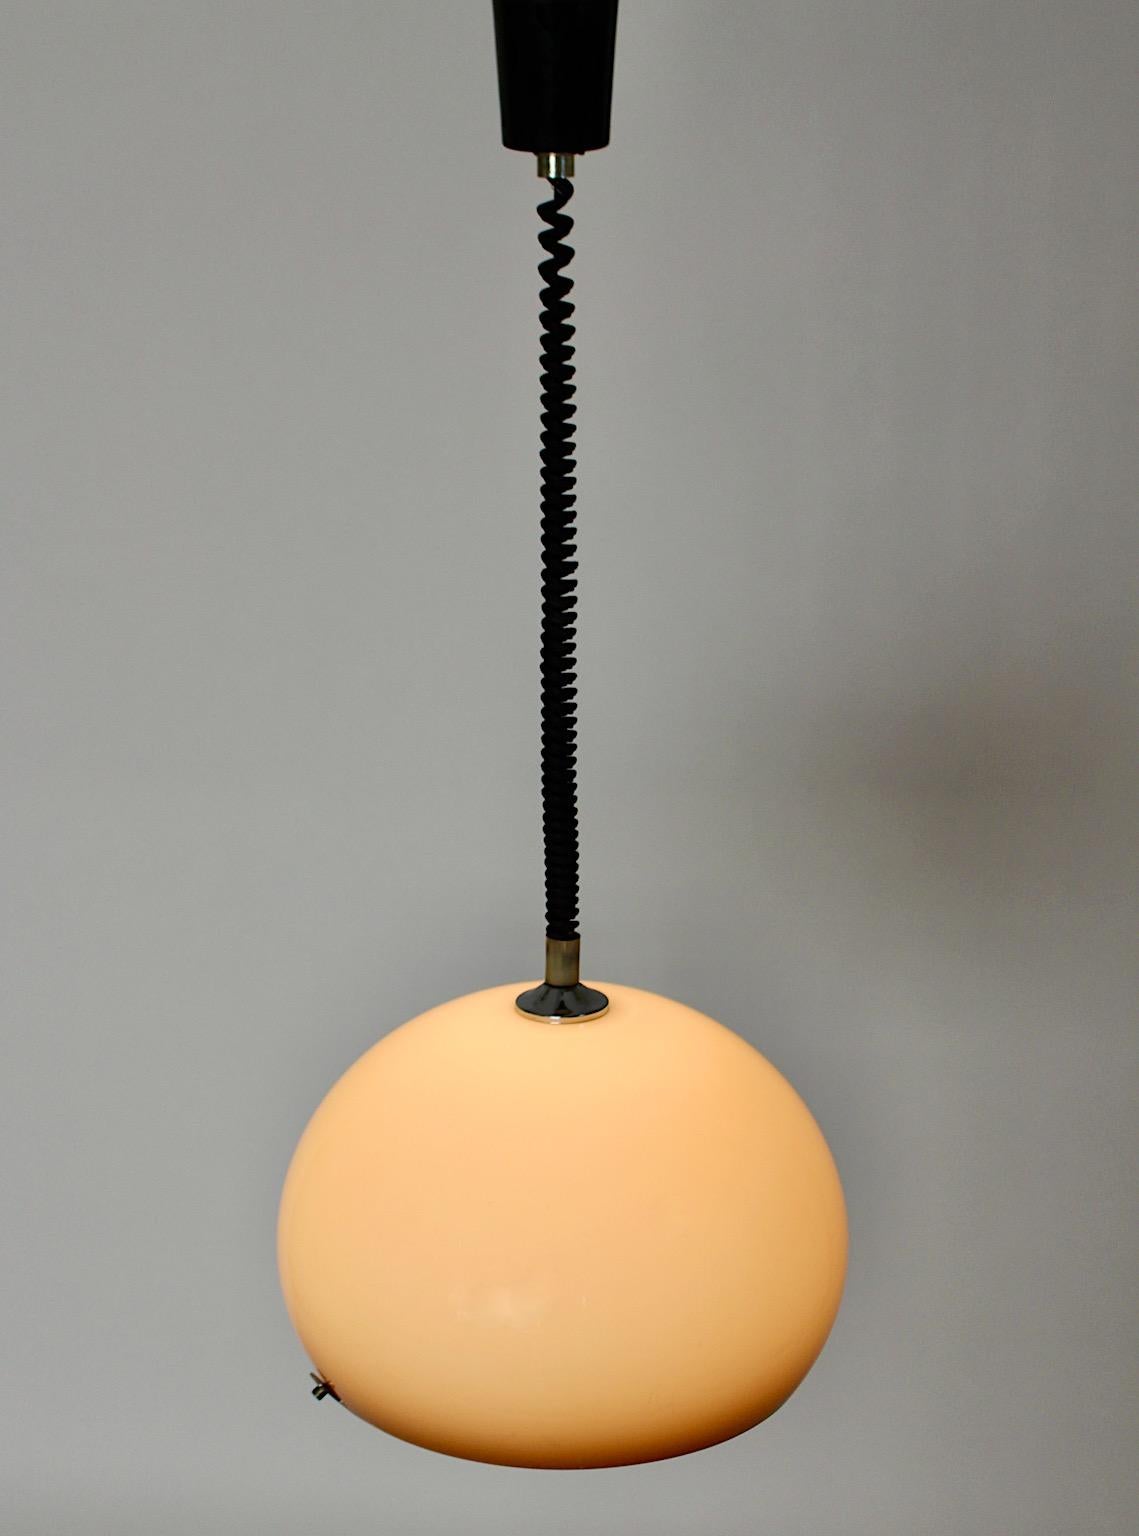 Space Age vintage chandelier or pendant from plastic and metal in soft brown hues 1960s Italy.
An amazing vintage chandelier in bubble shape in soft pastel brown color hues with a black curled extendable cable, so the height is from 80 cm to 135